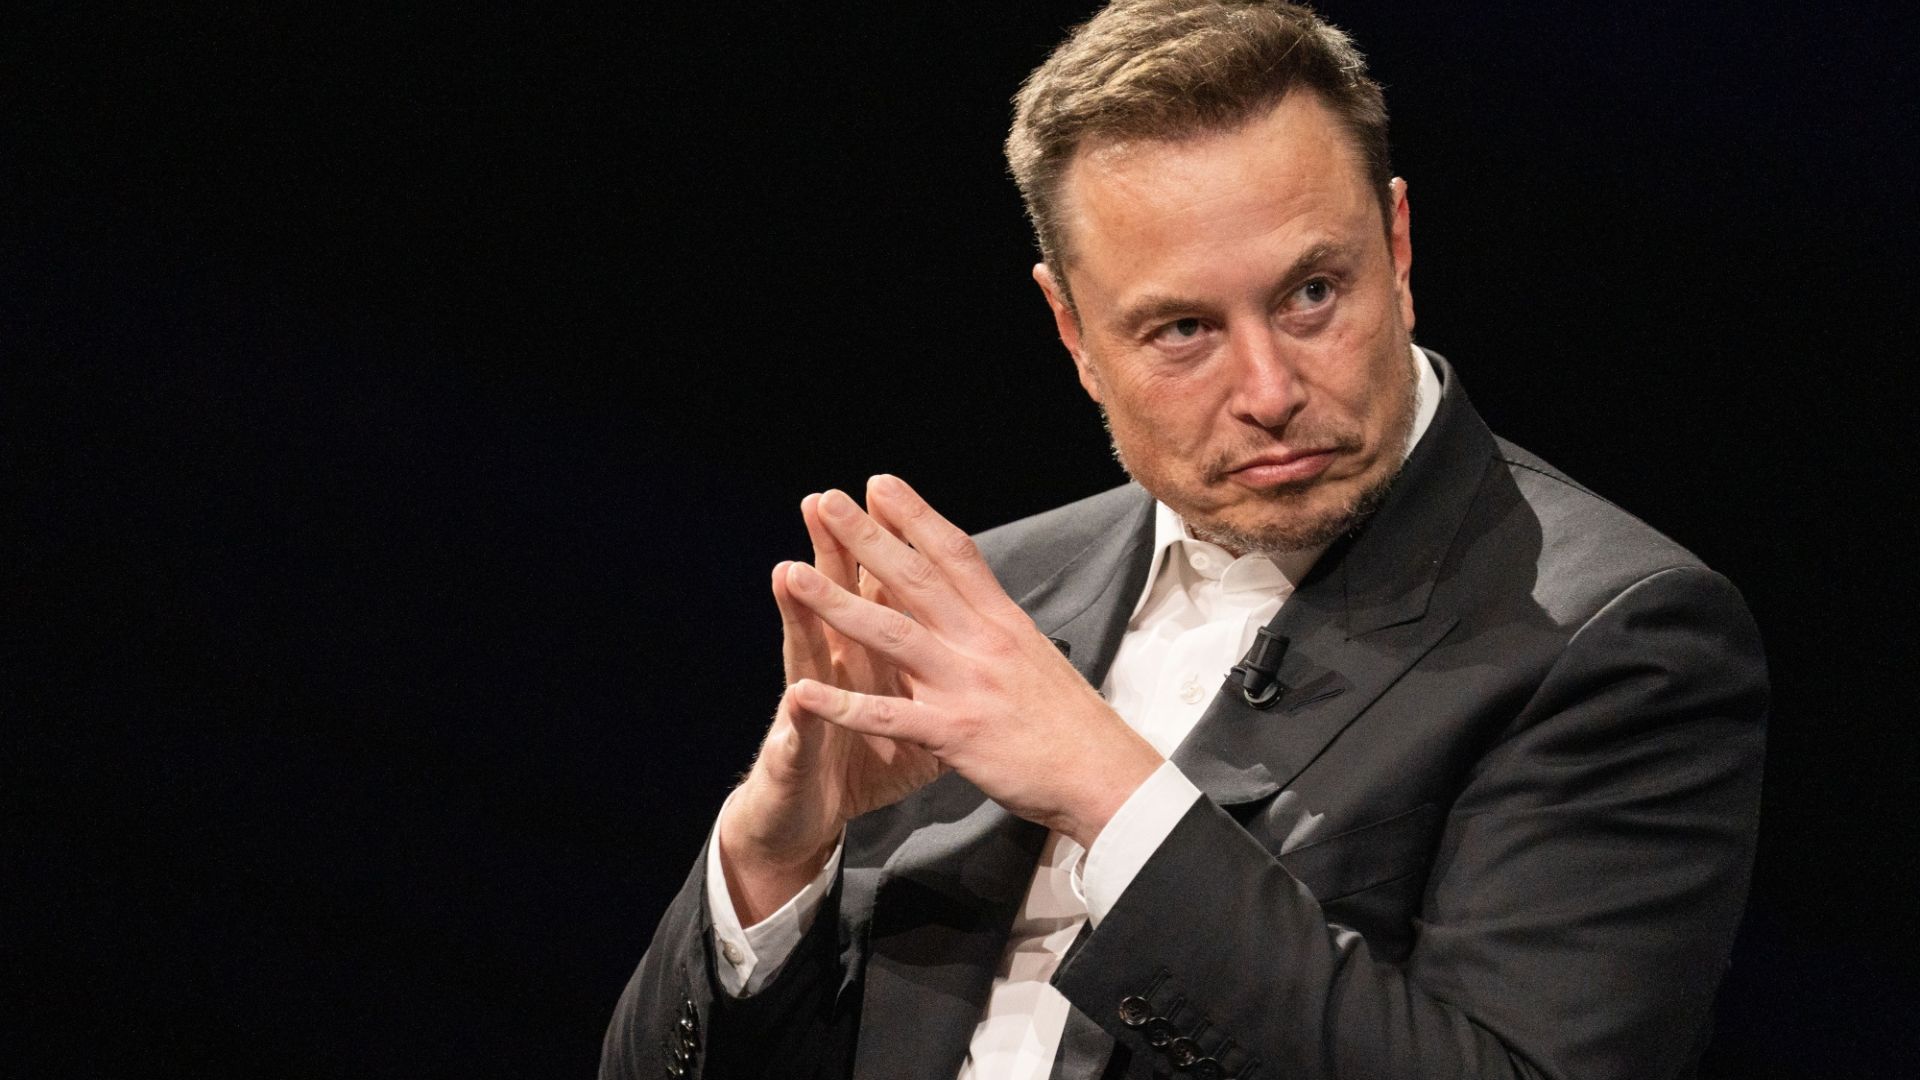 Elon Musk’s $2-$3 Billion Investment in India: What You Need to Know